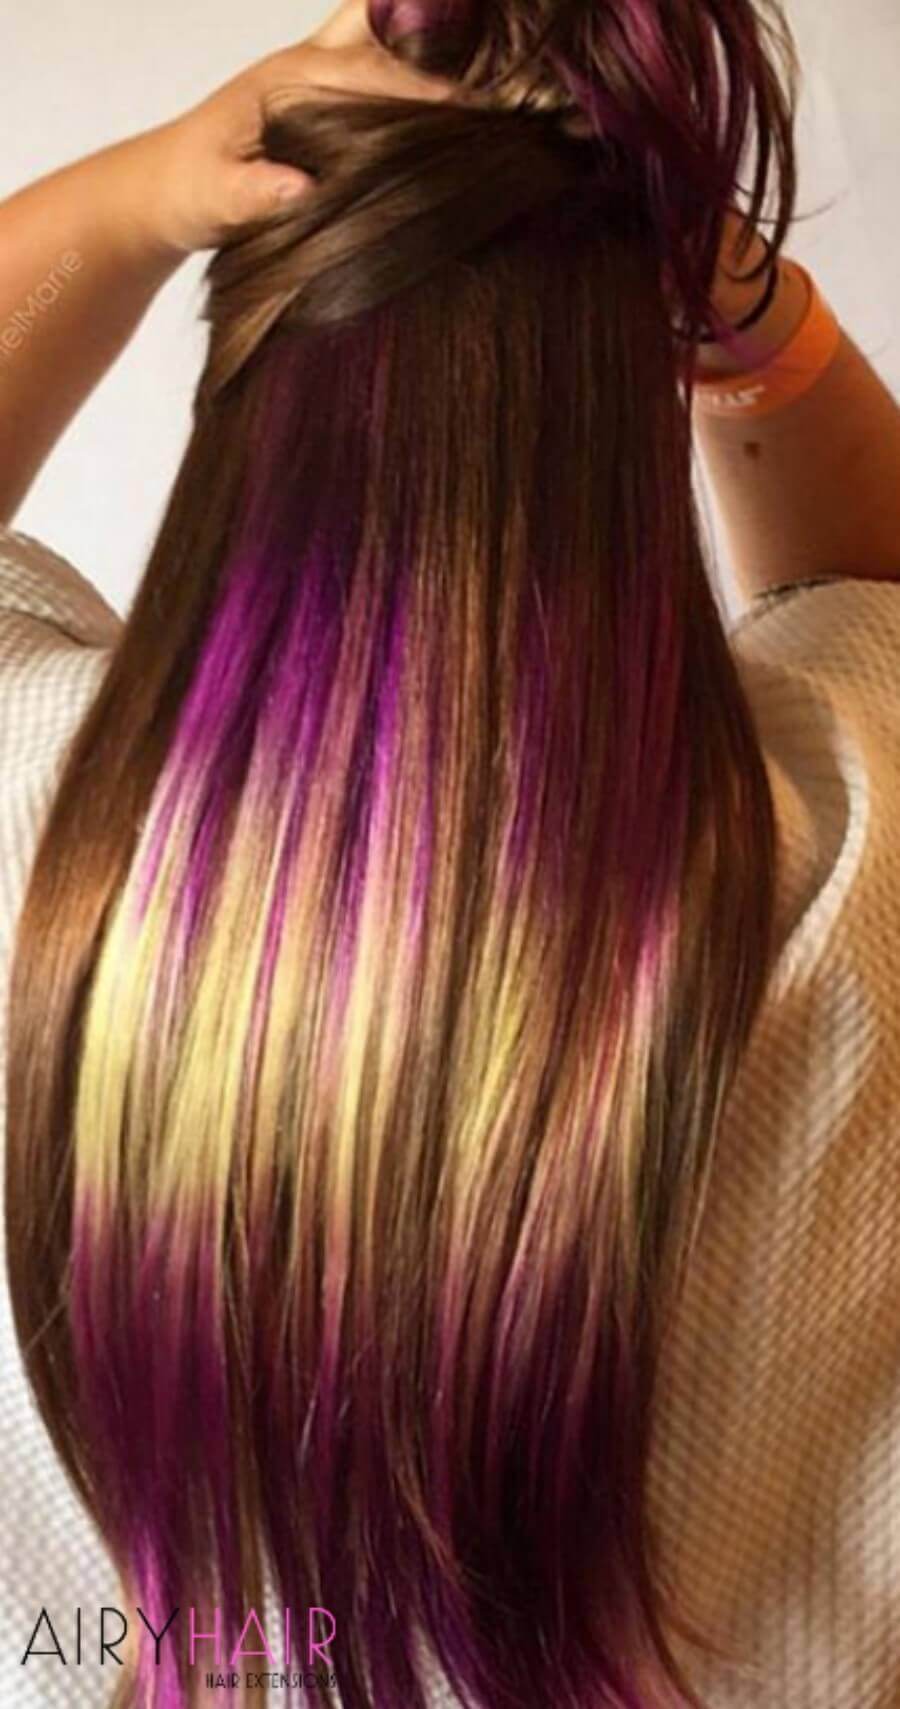 Natural Brown Hair with Yellow and Purple Shine Line